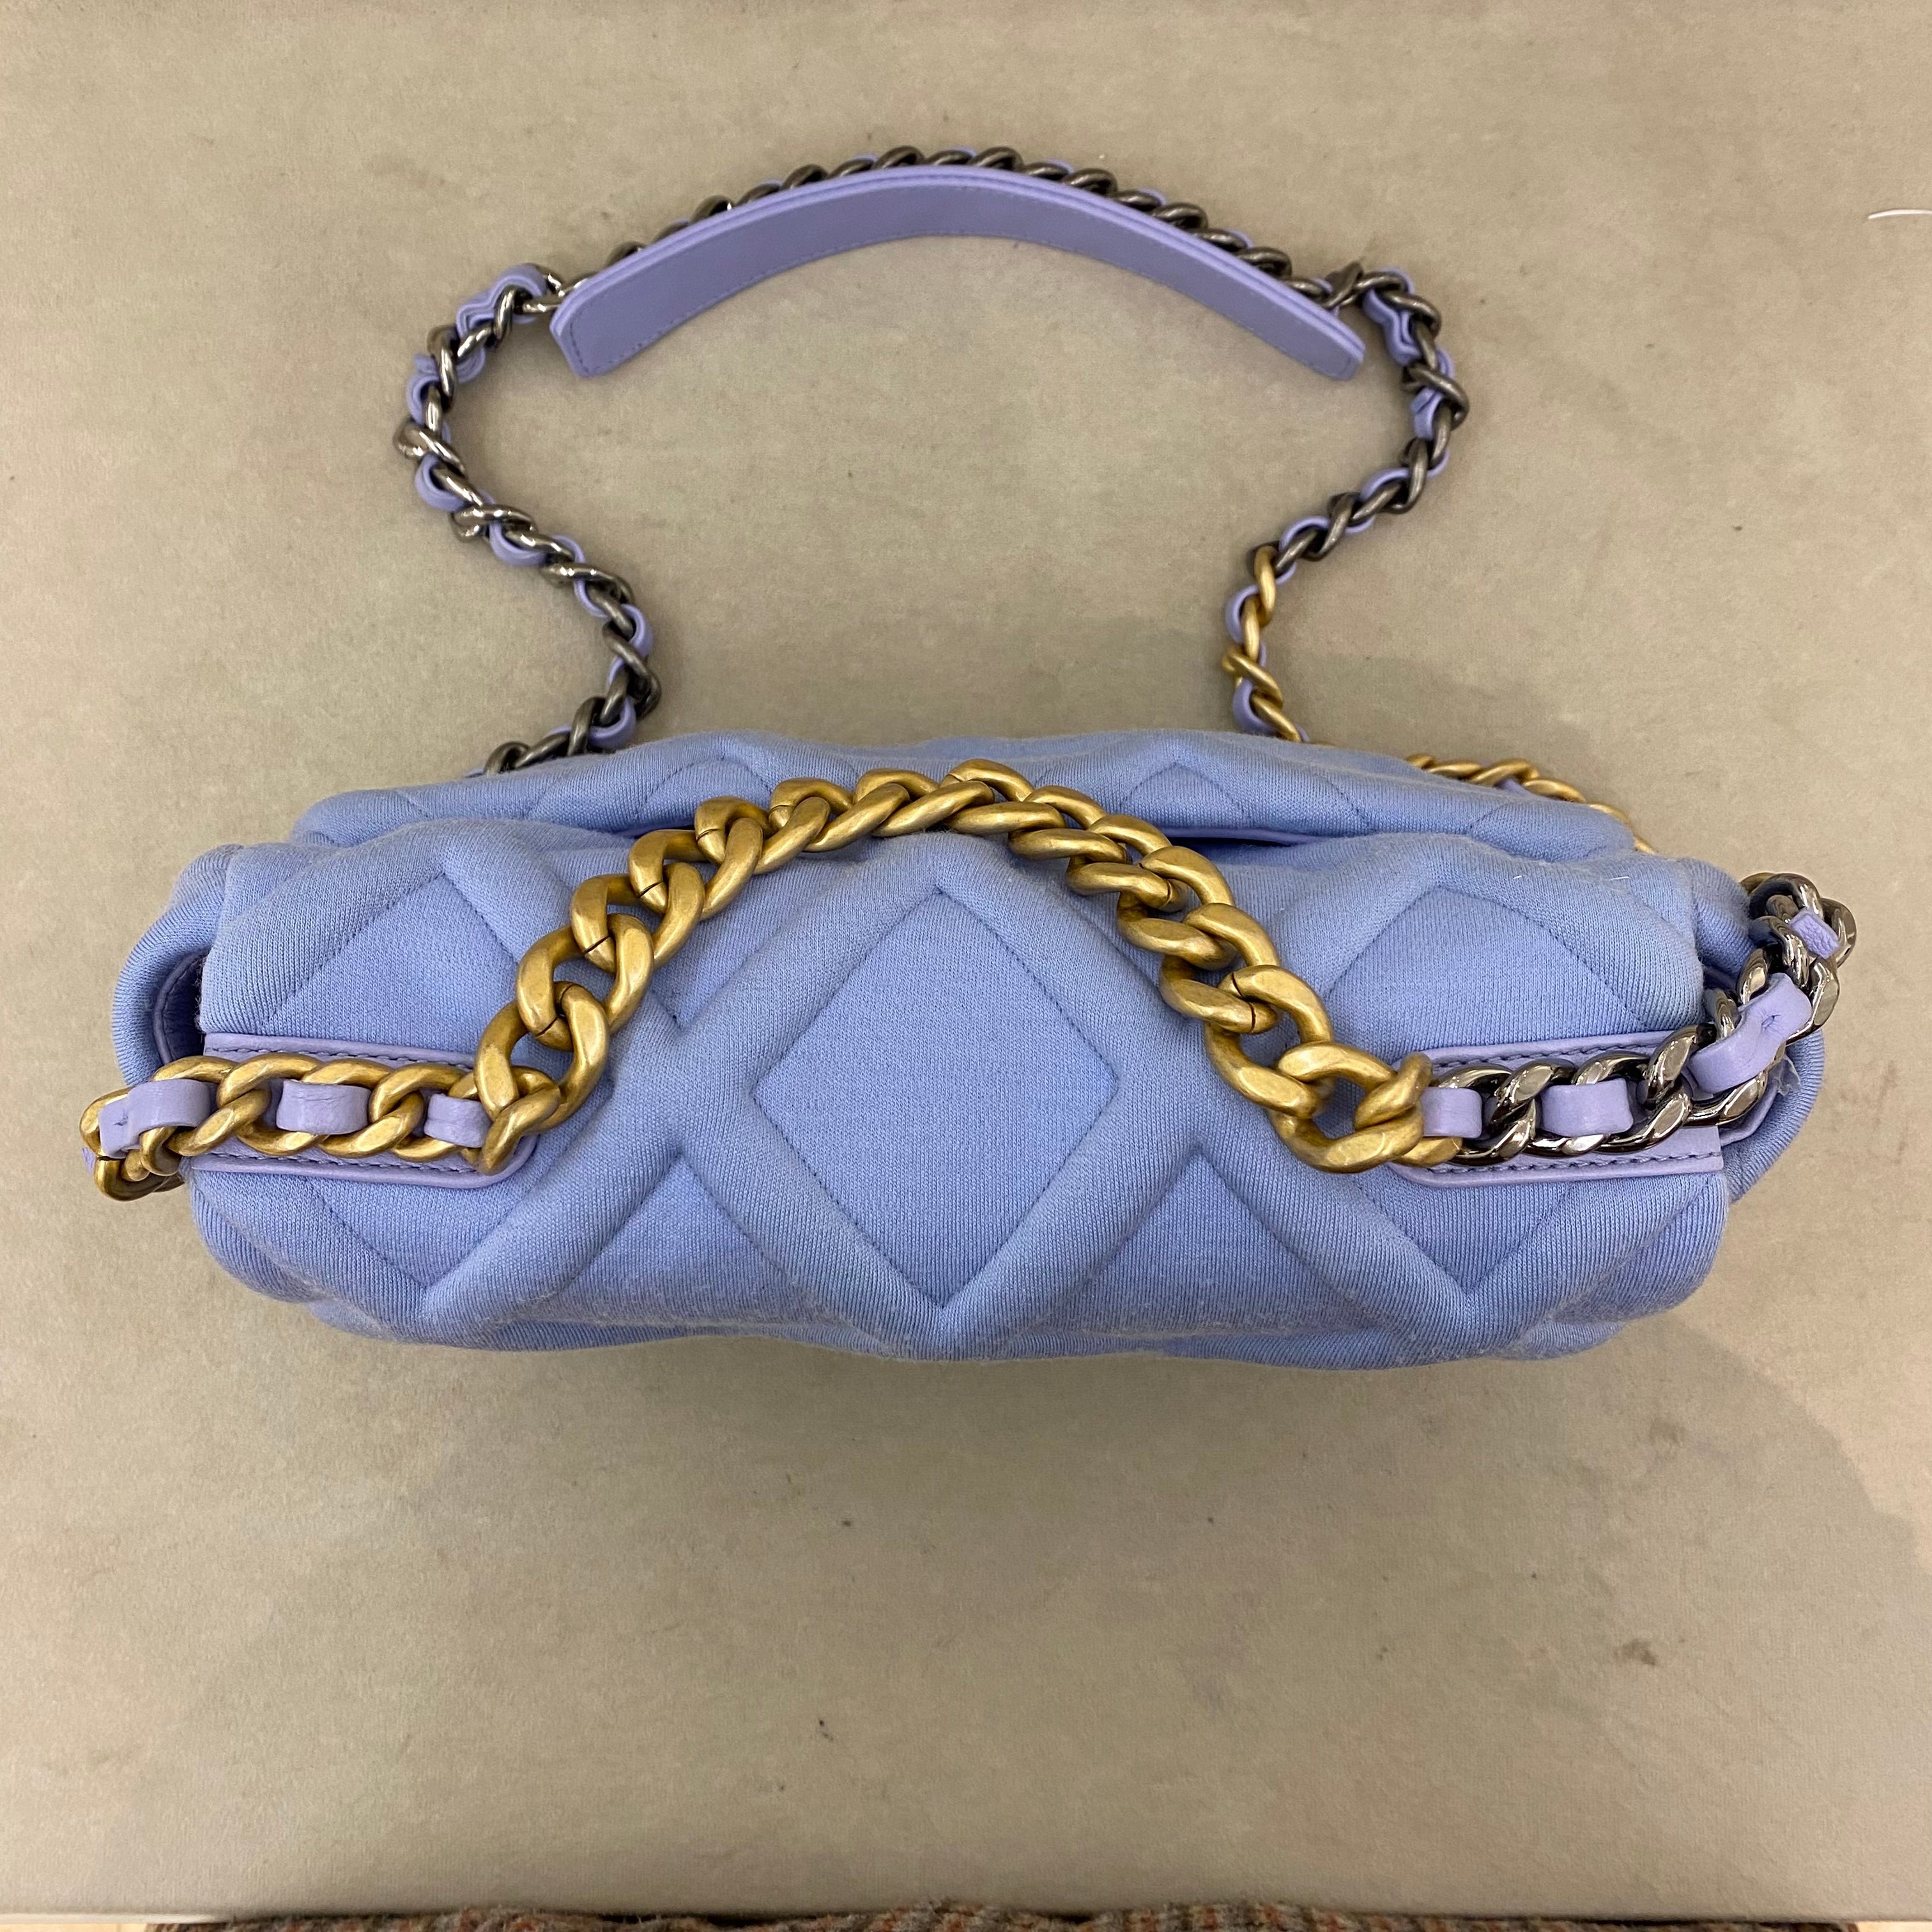 Chanel 19 Small in Blue